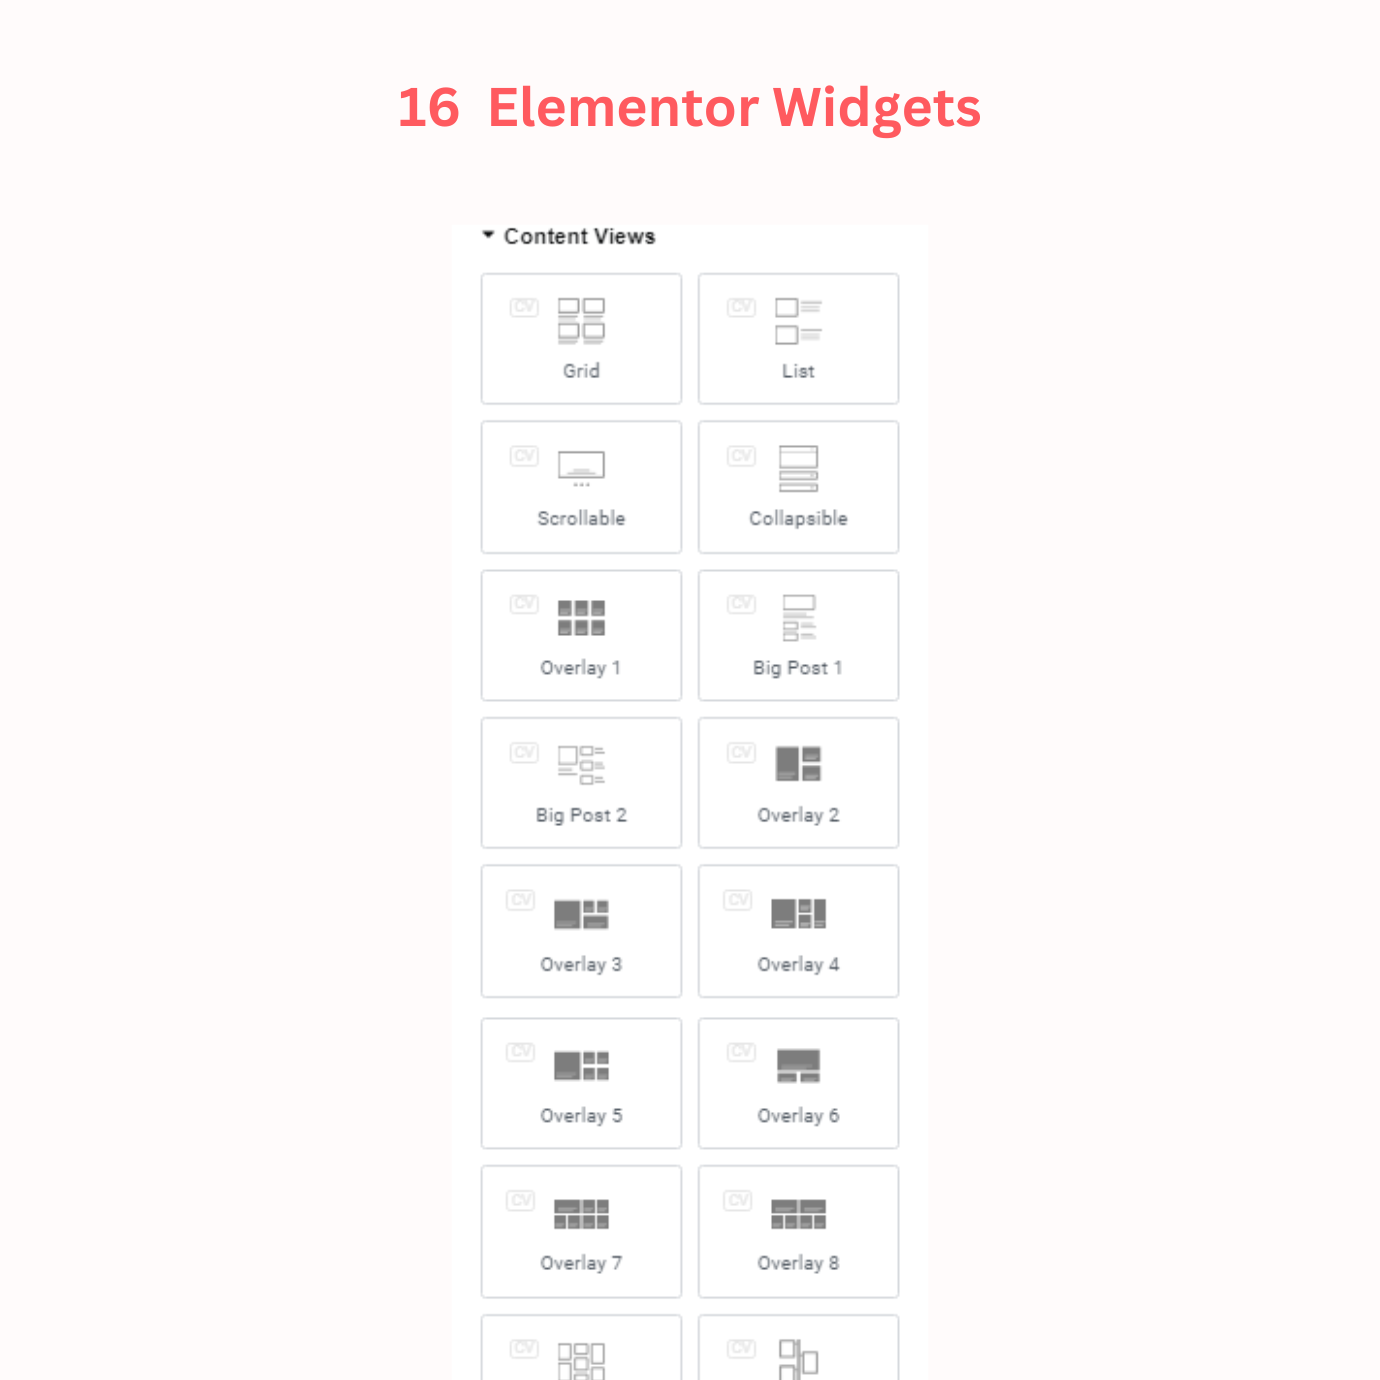 16 widgets for the Elementor page builder